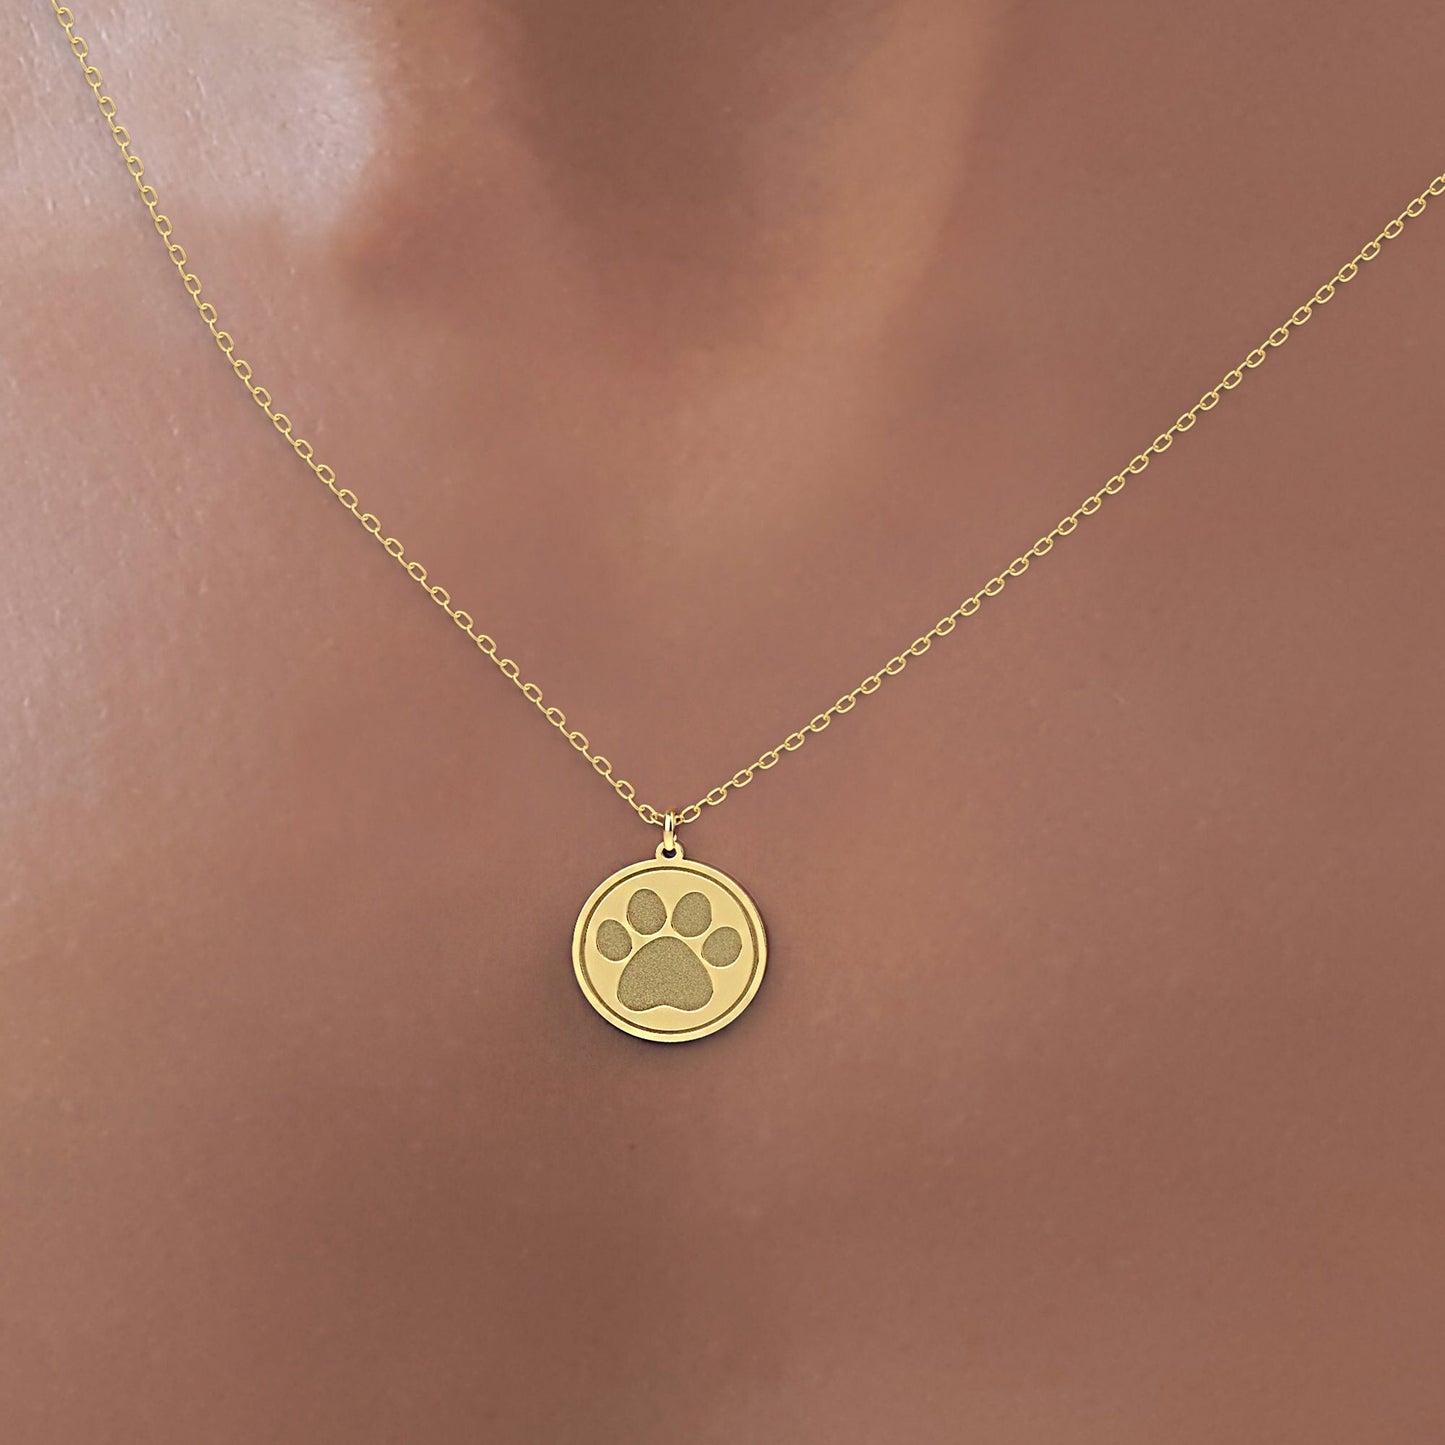 Dog Paw Disc Necklace